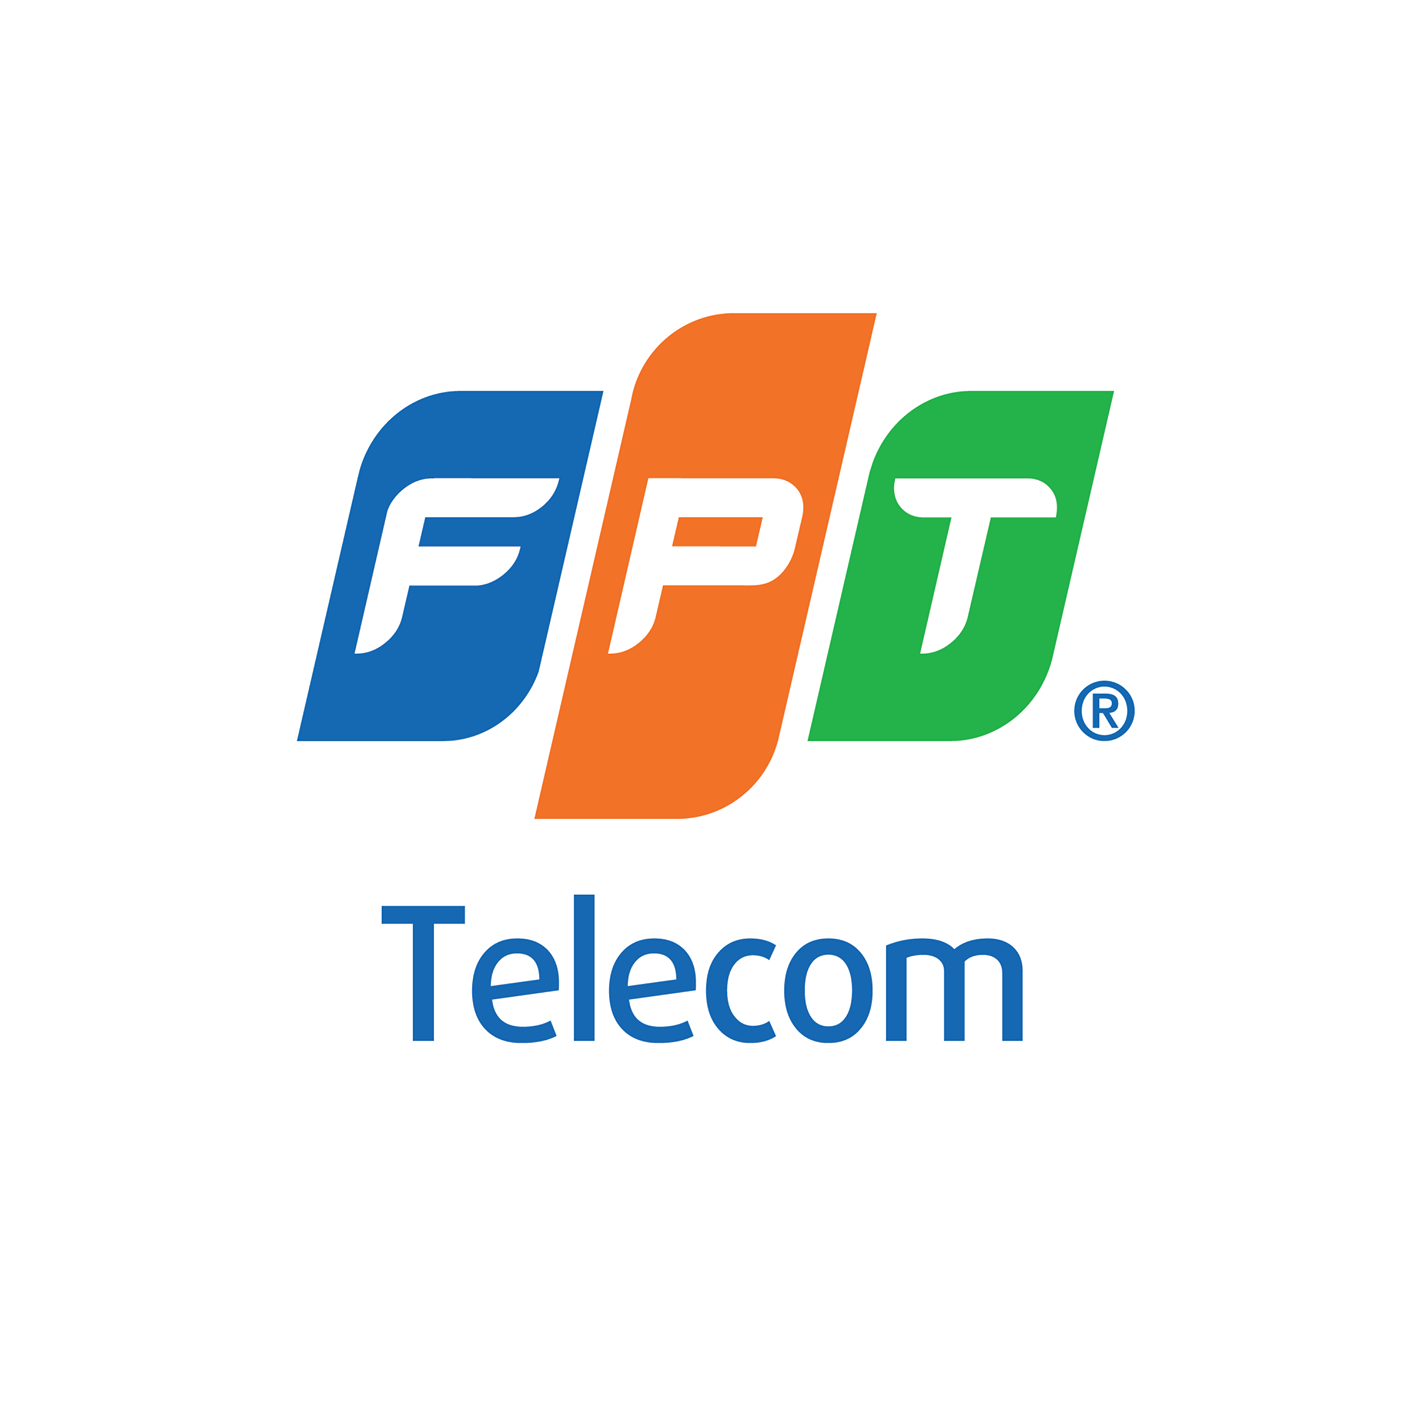 FPT Telecom Joint Stock